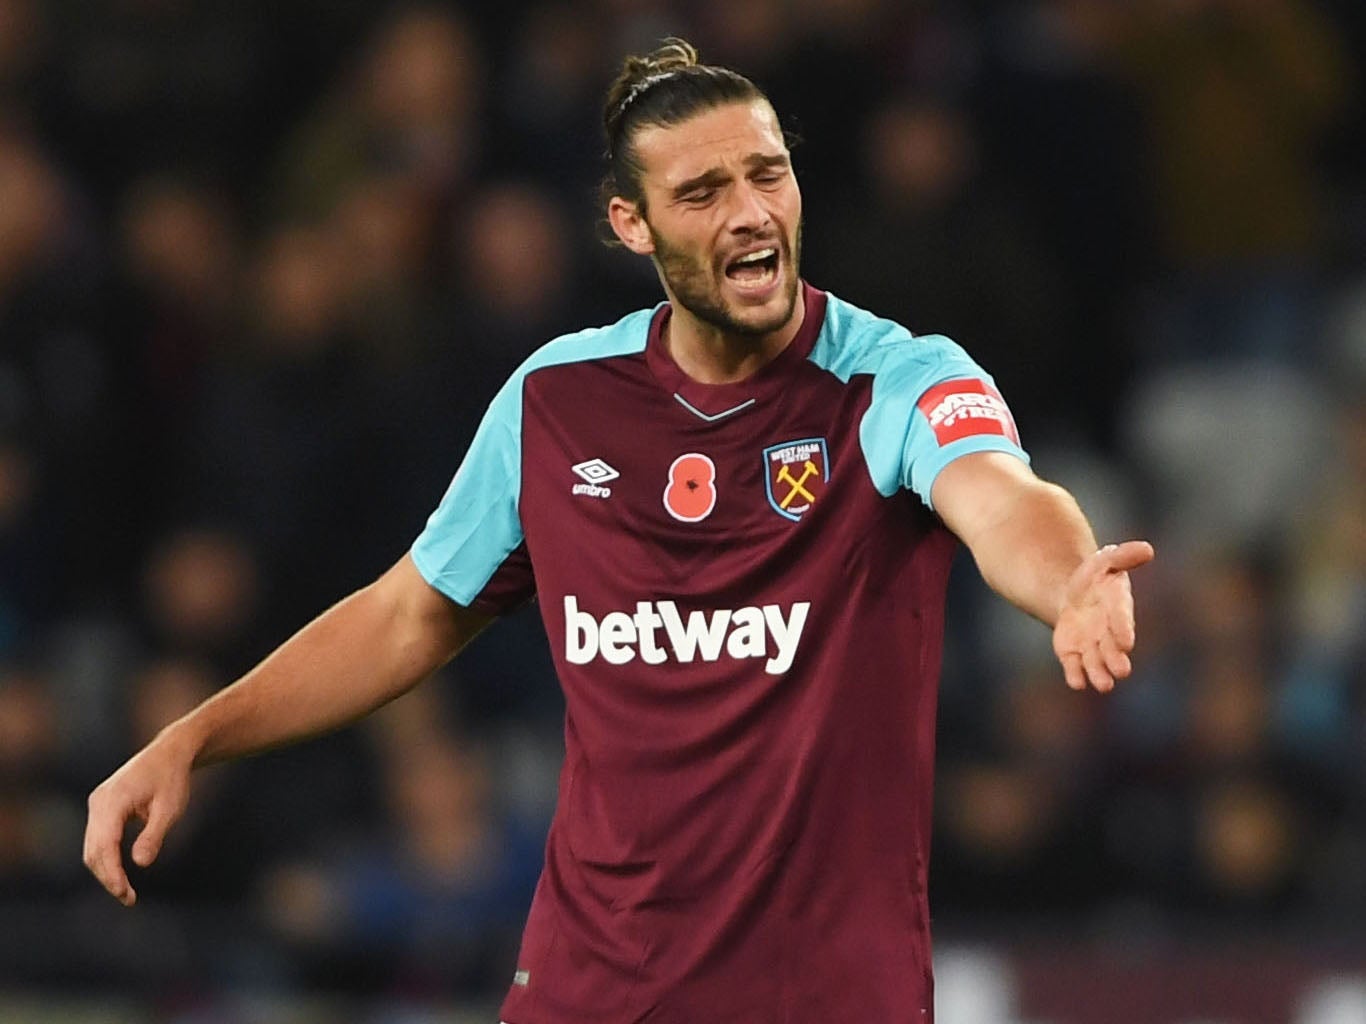 Carroll has urged West Ham fans to follow Crystal Palace's lead